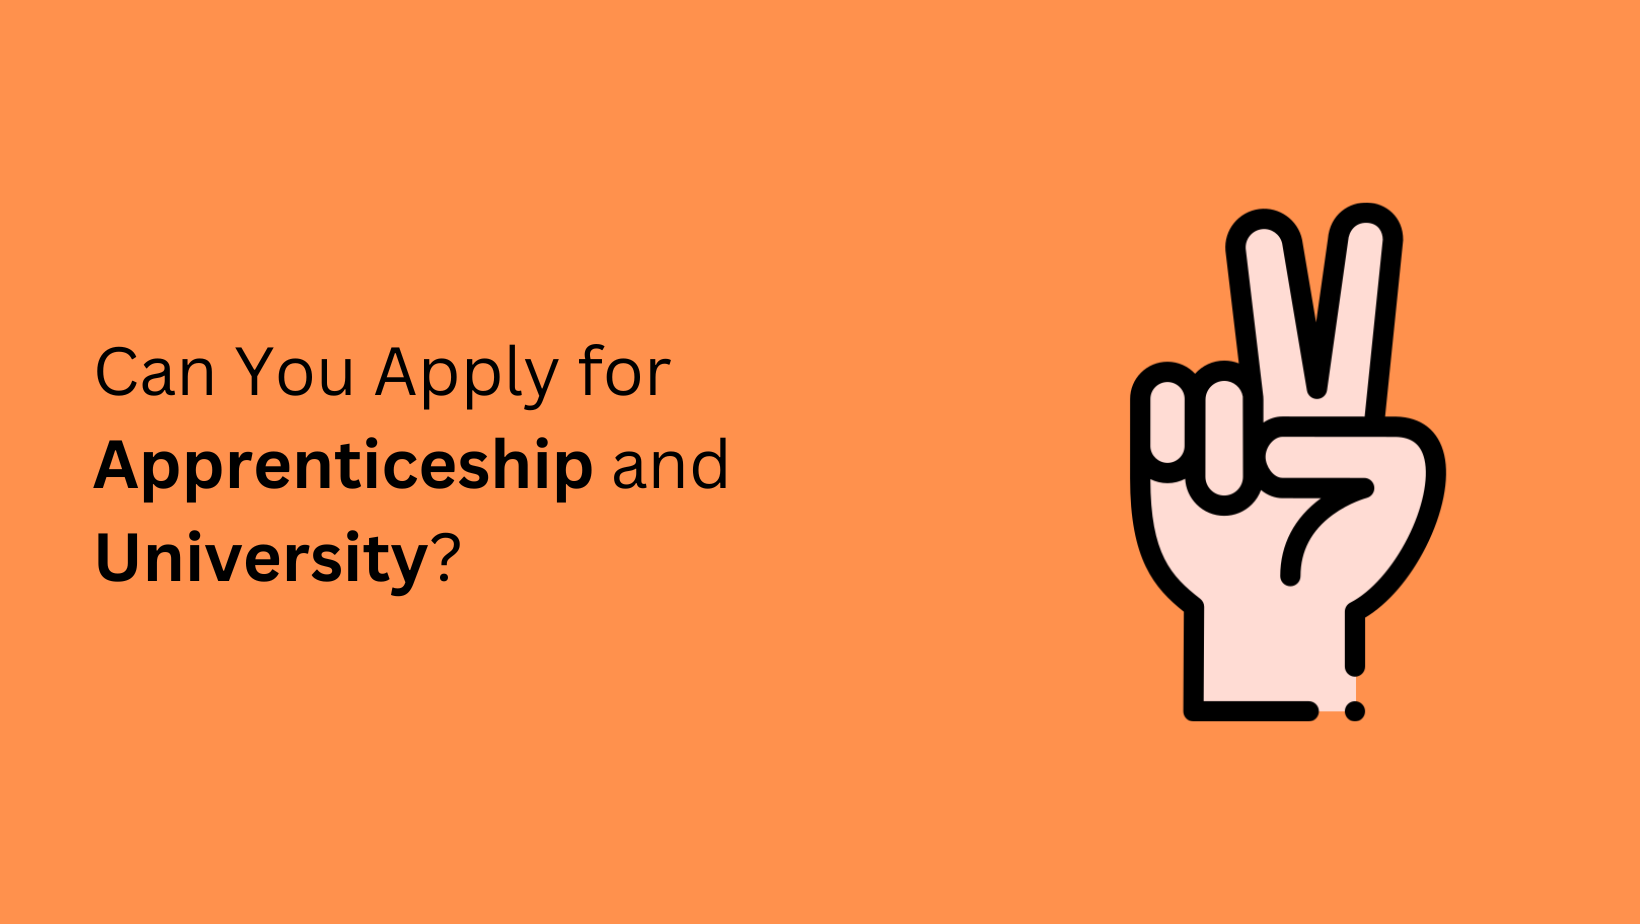 Can You Apply for Apprenticeship and University